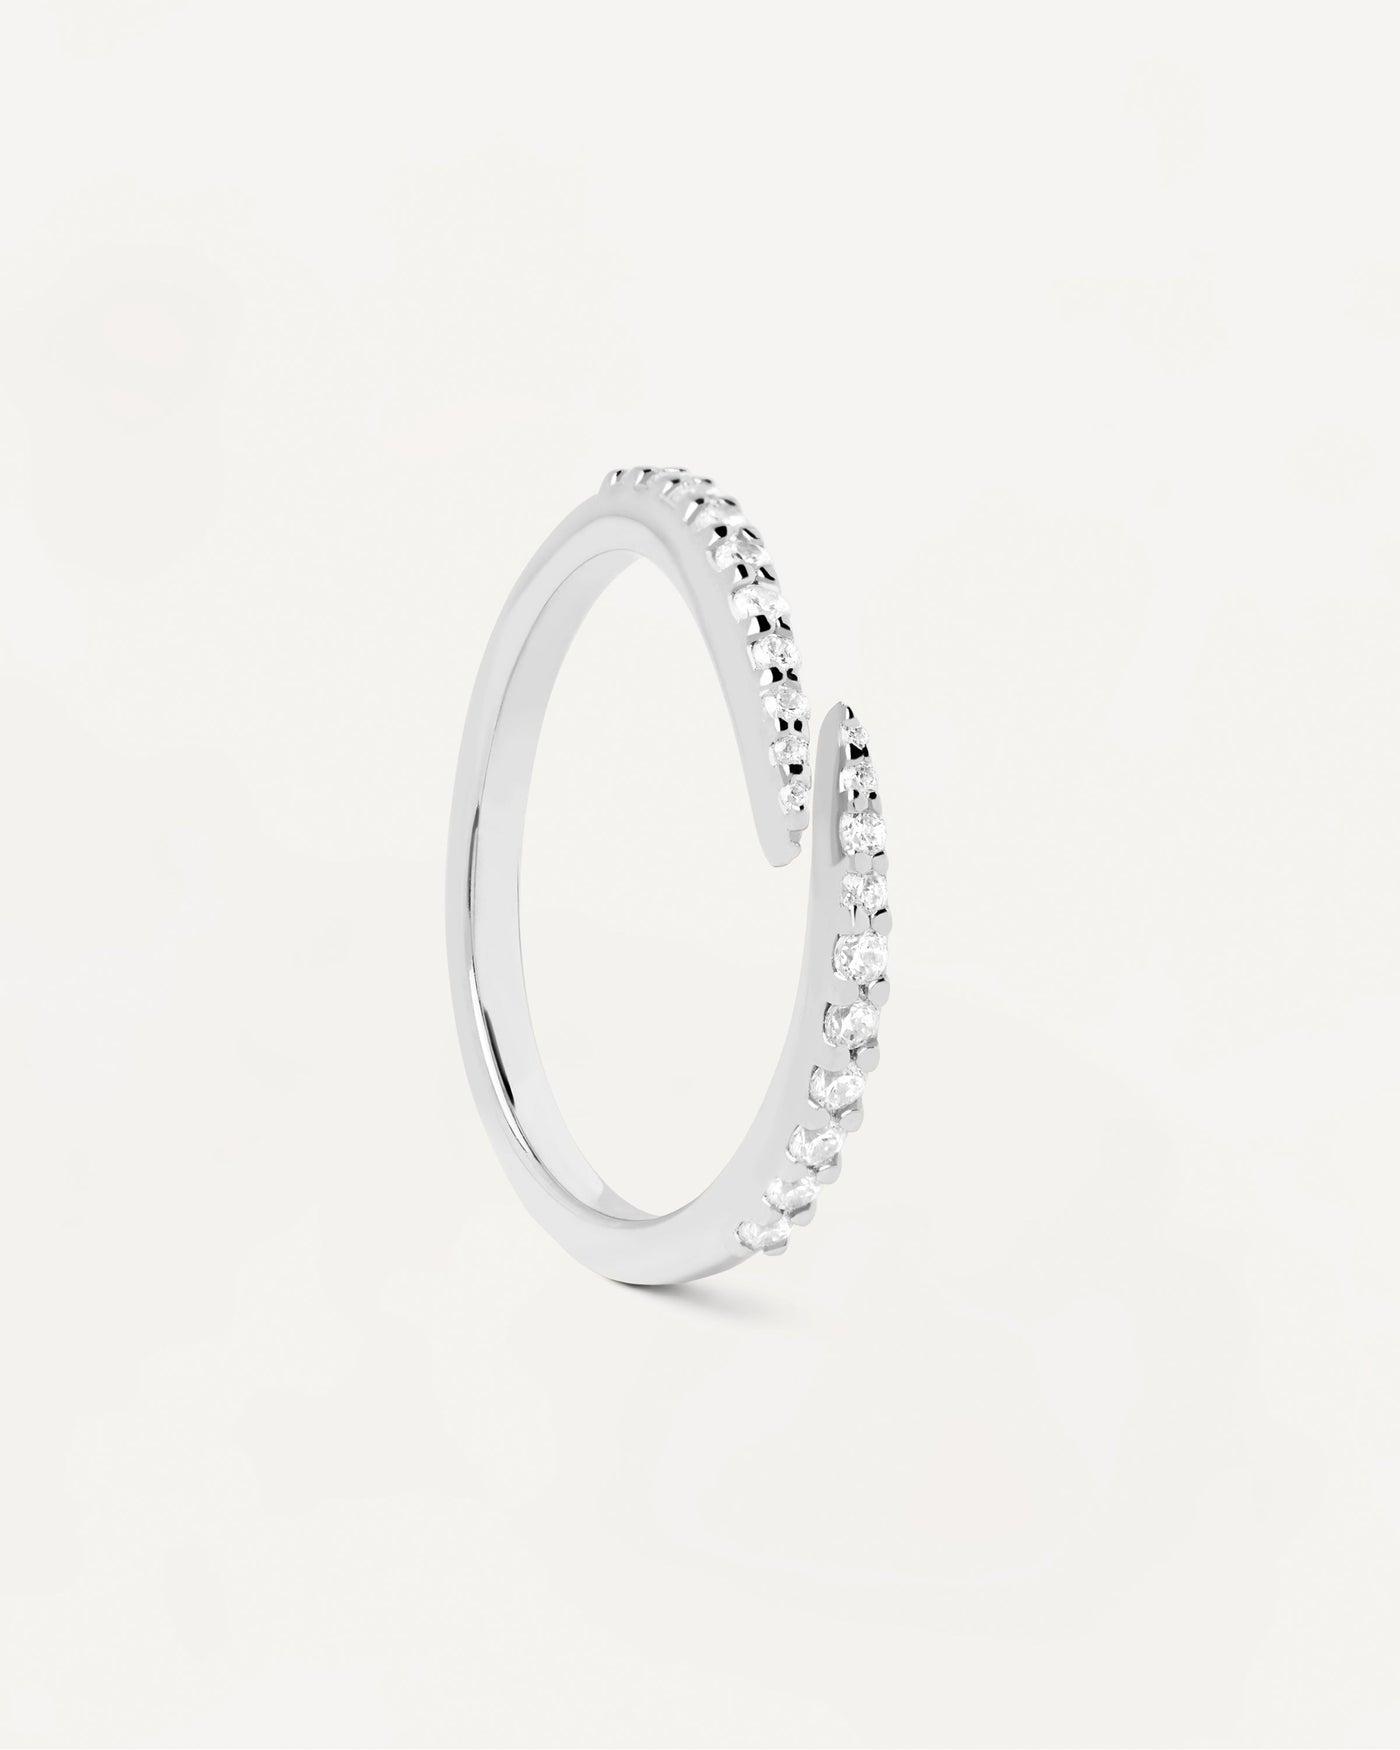 2023 Selection | Embrace Silver Ring. Almost ring in sterling silver with dainty zirconia. Get the latest arrival from PDPAOLA. Place your order safely and get this Best Seller. Free Shipping.